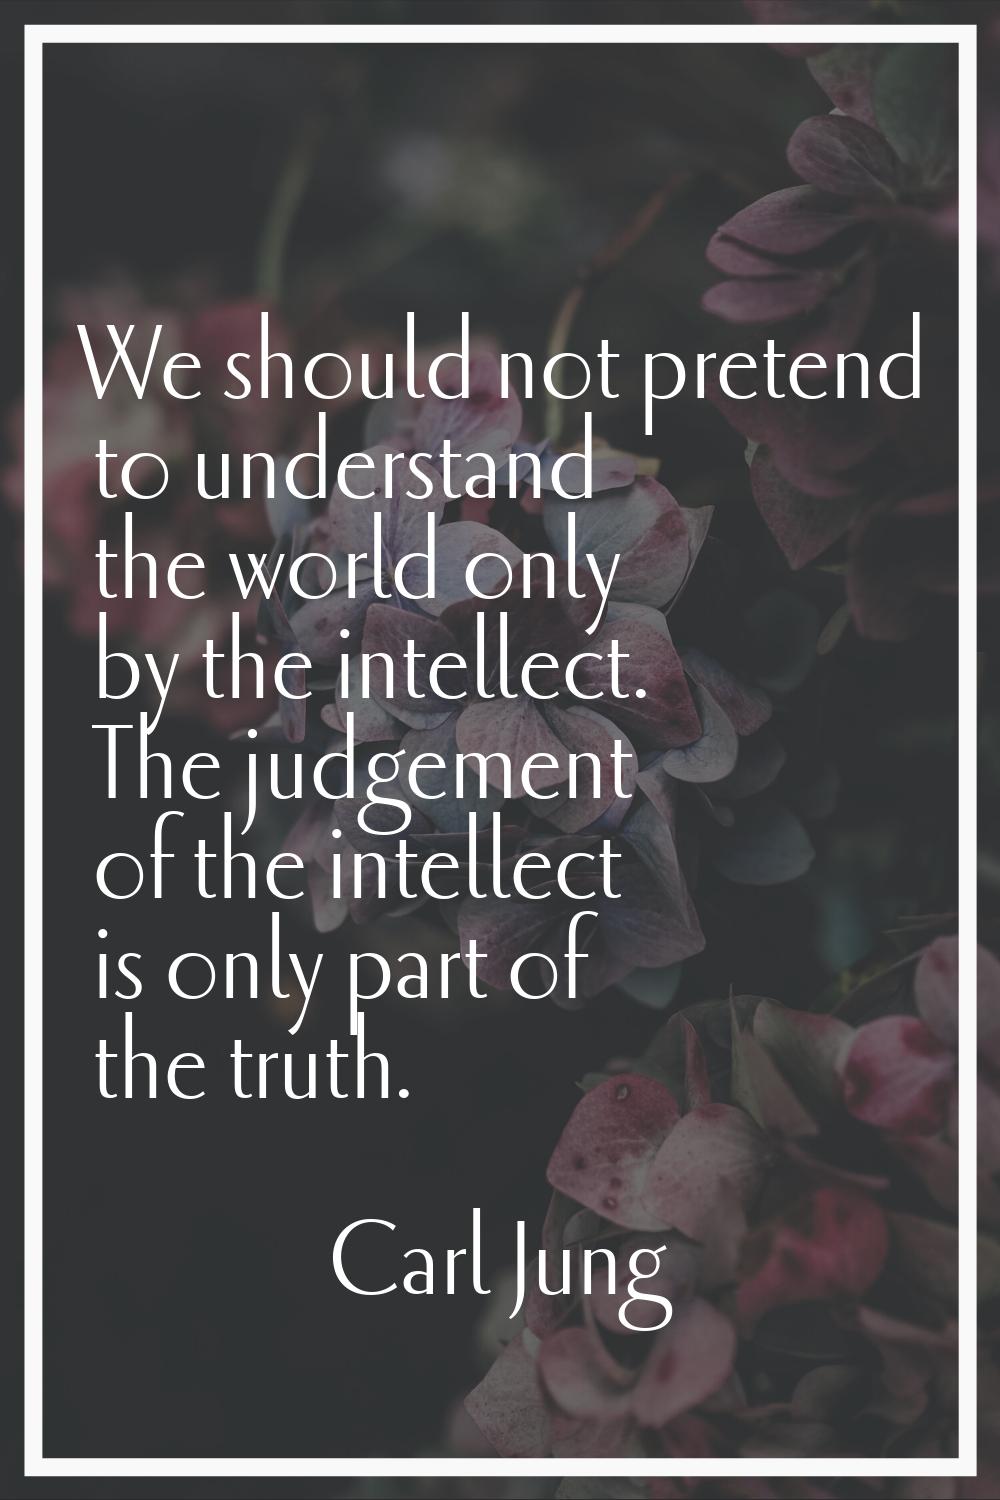 We should not pretend to understand the world only by the intellect. The judgement of the intellect